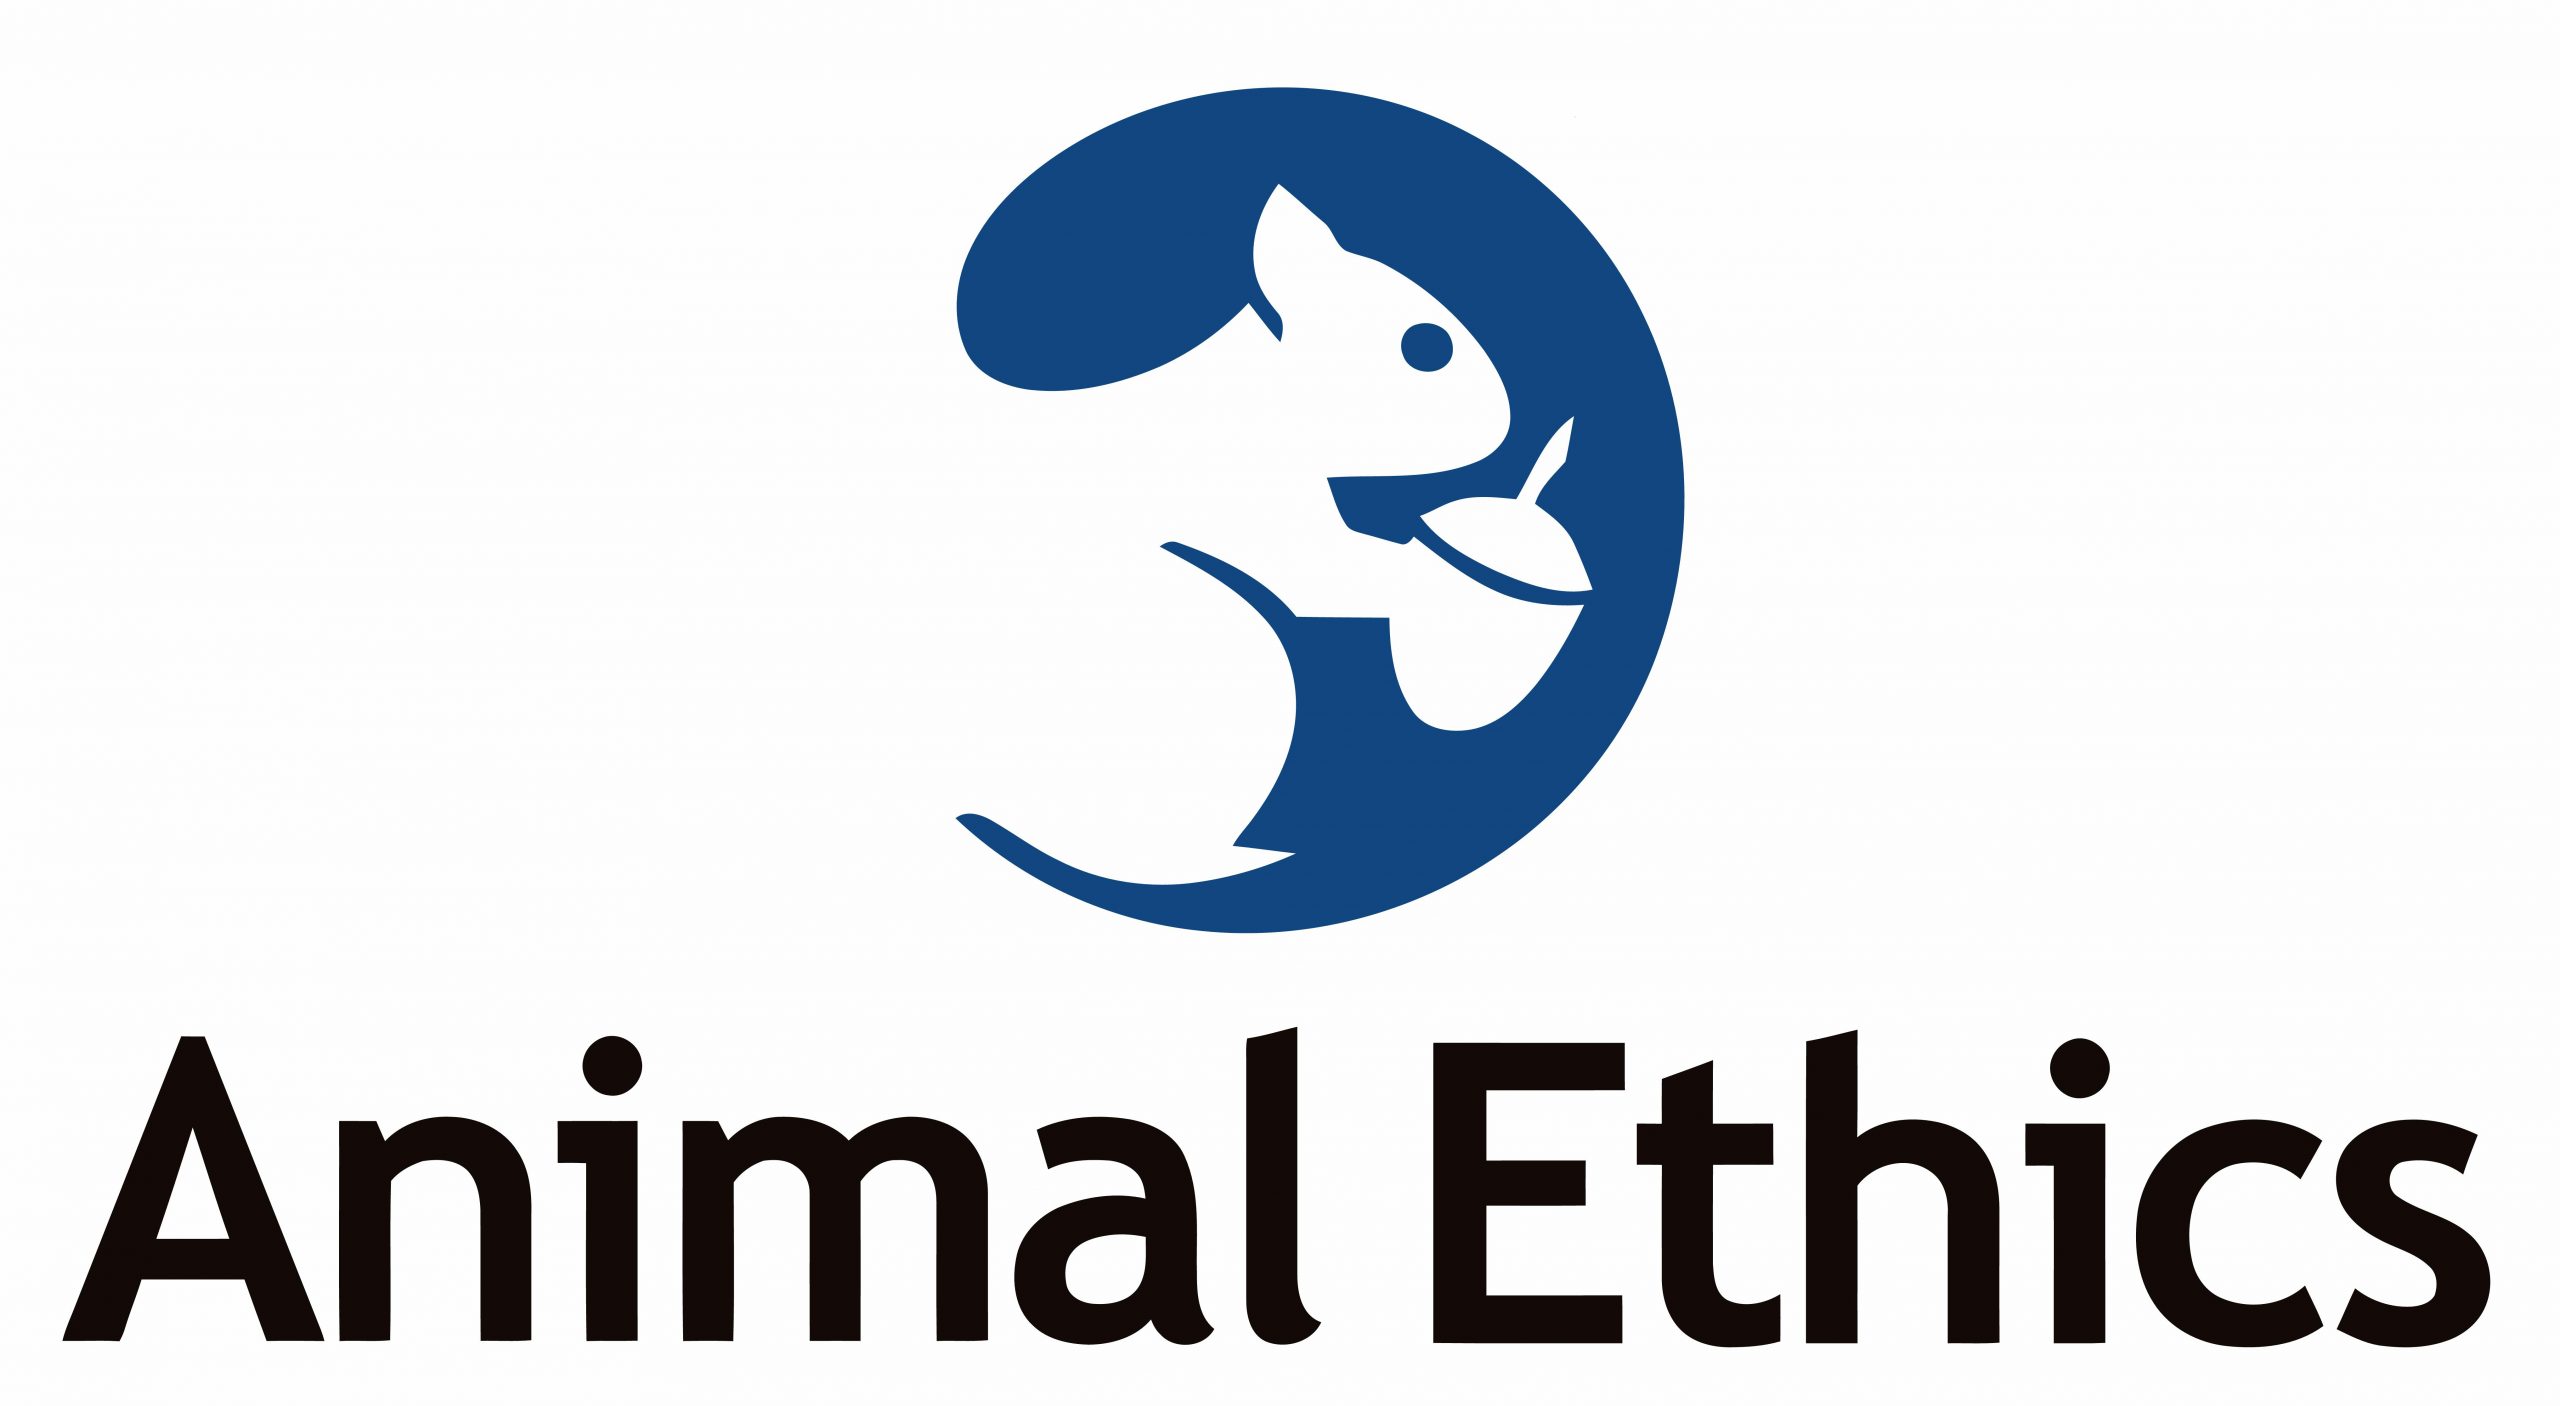 animal research ethics committee